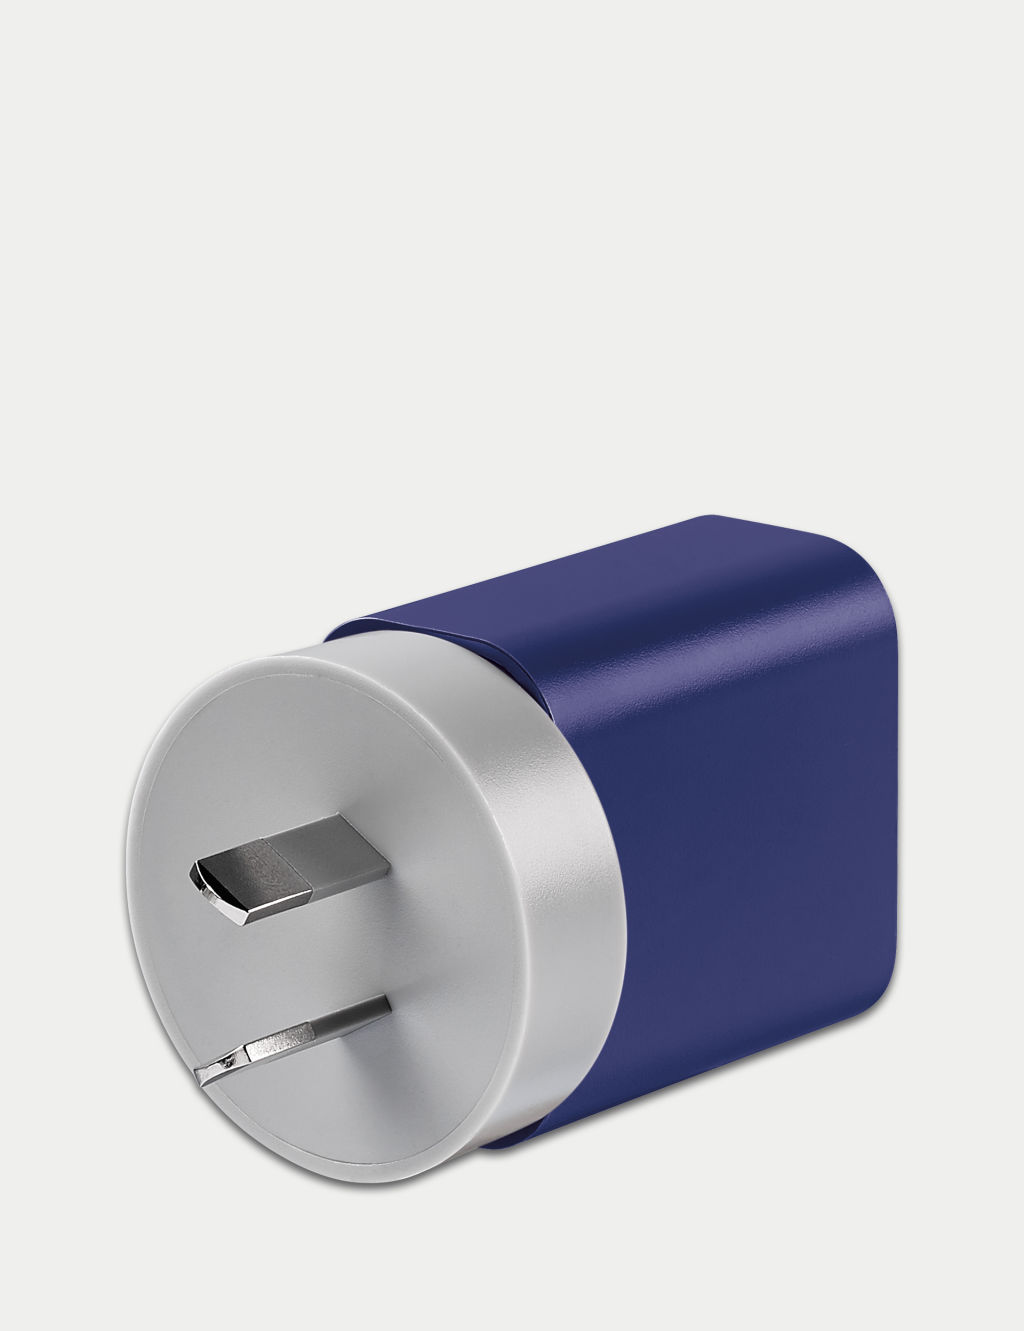 Worldwide USB A & C Charger 6 of 7